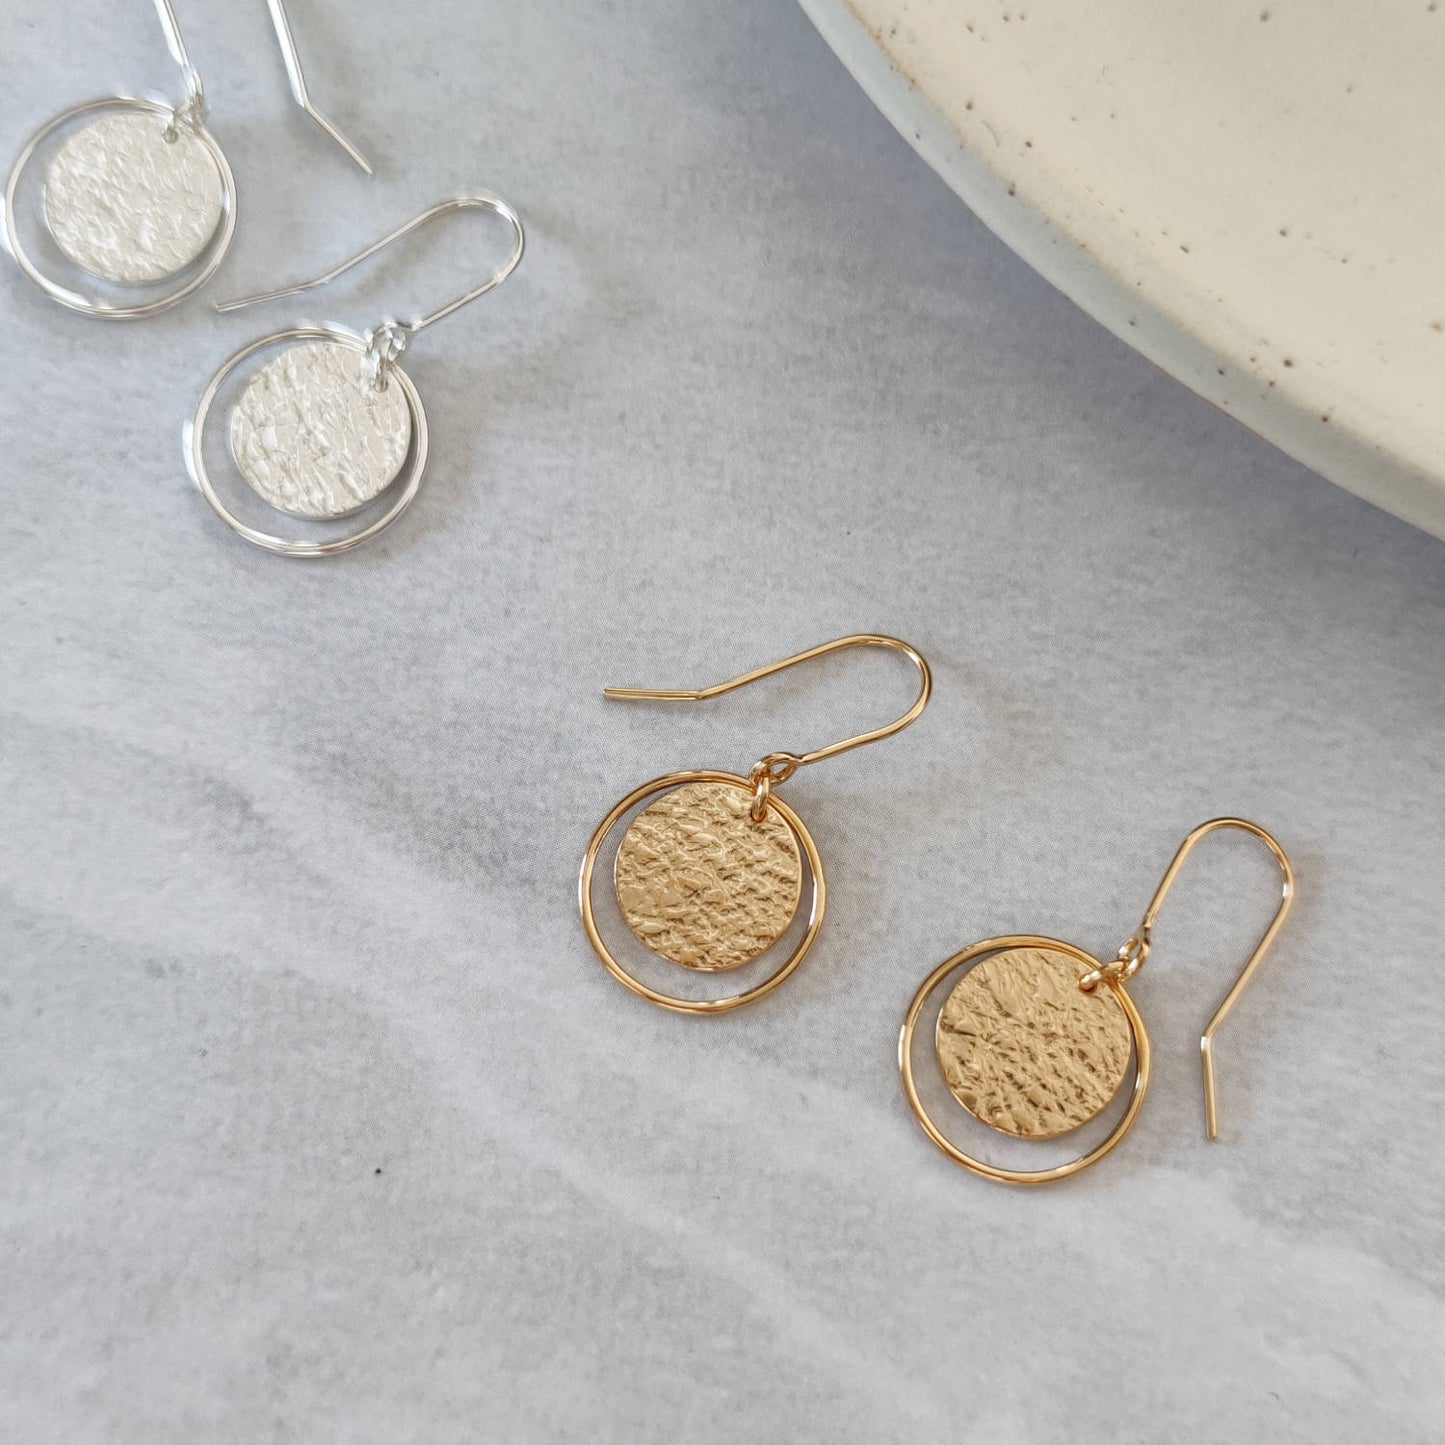 gold and silver roundabout earrings on marble background